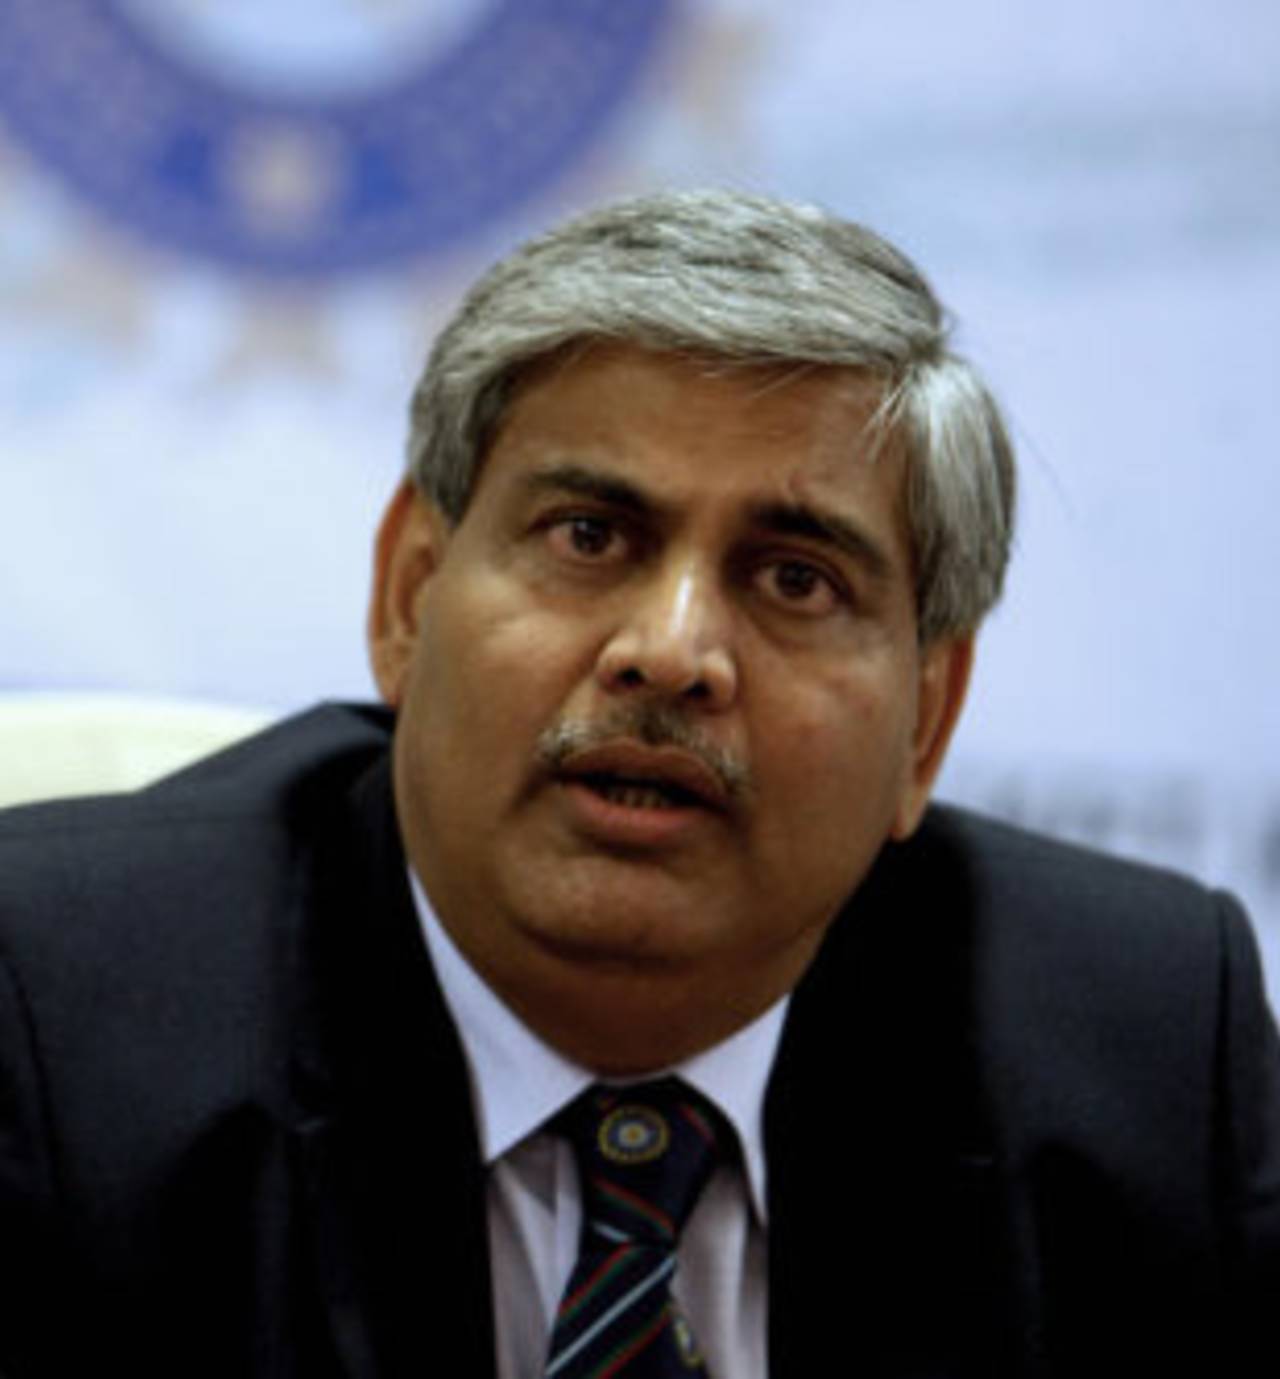 Shashank Manohar, the BCCI president, is a senior member of the ICC board, which has consistently maintained that corruption in cricket is a menace&nbsp;&nbsp;&bull;&nbsp;&nbsp;AFP